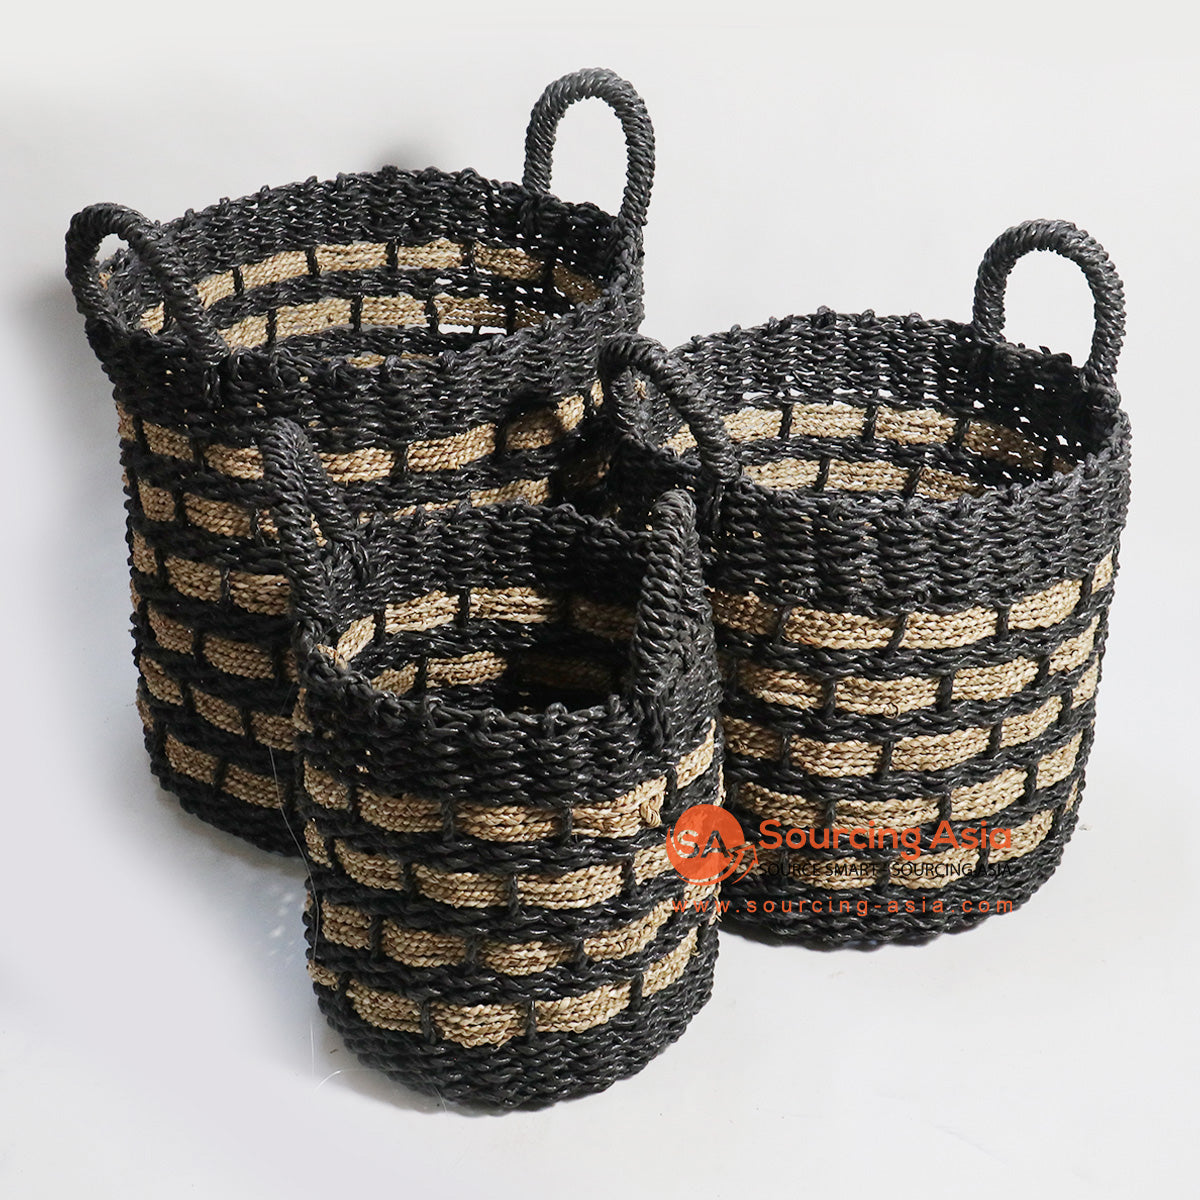 HBSC138 SET OF THREE BLACK AND NATURAL SEAGRASS BASKETS WITH HANDLE